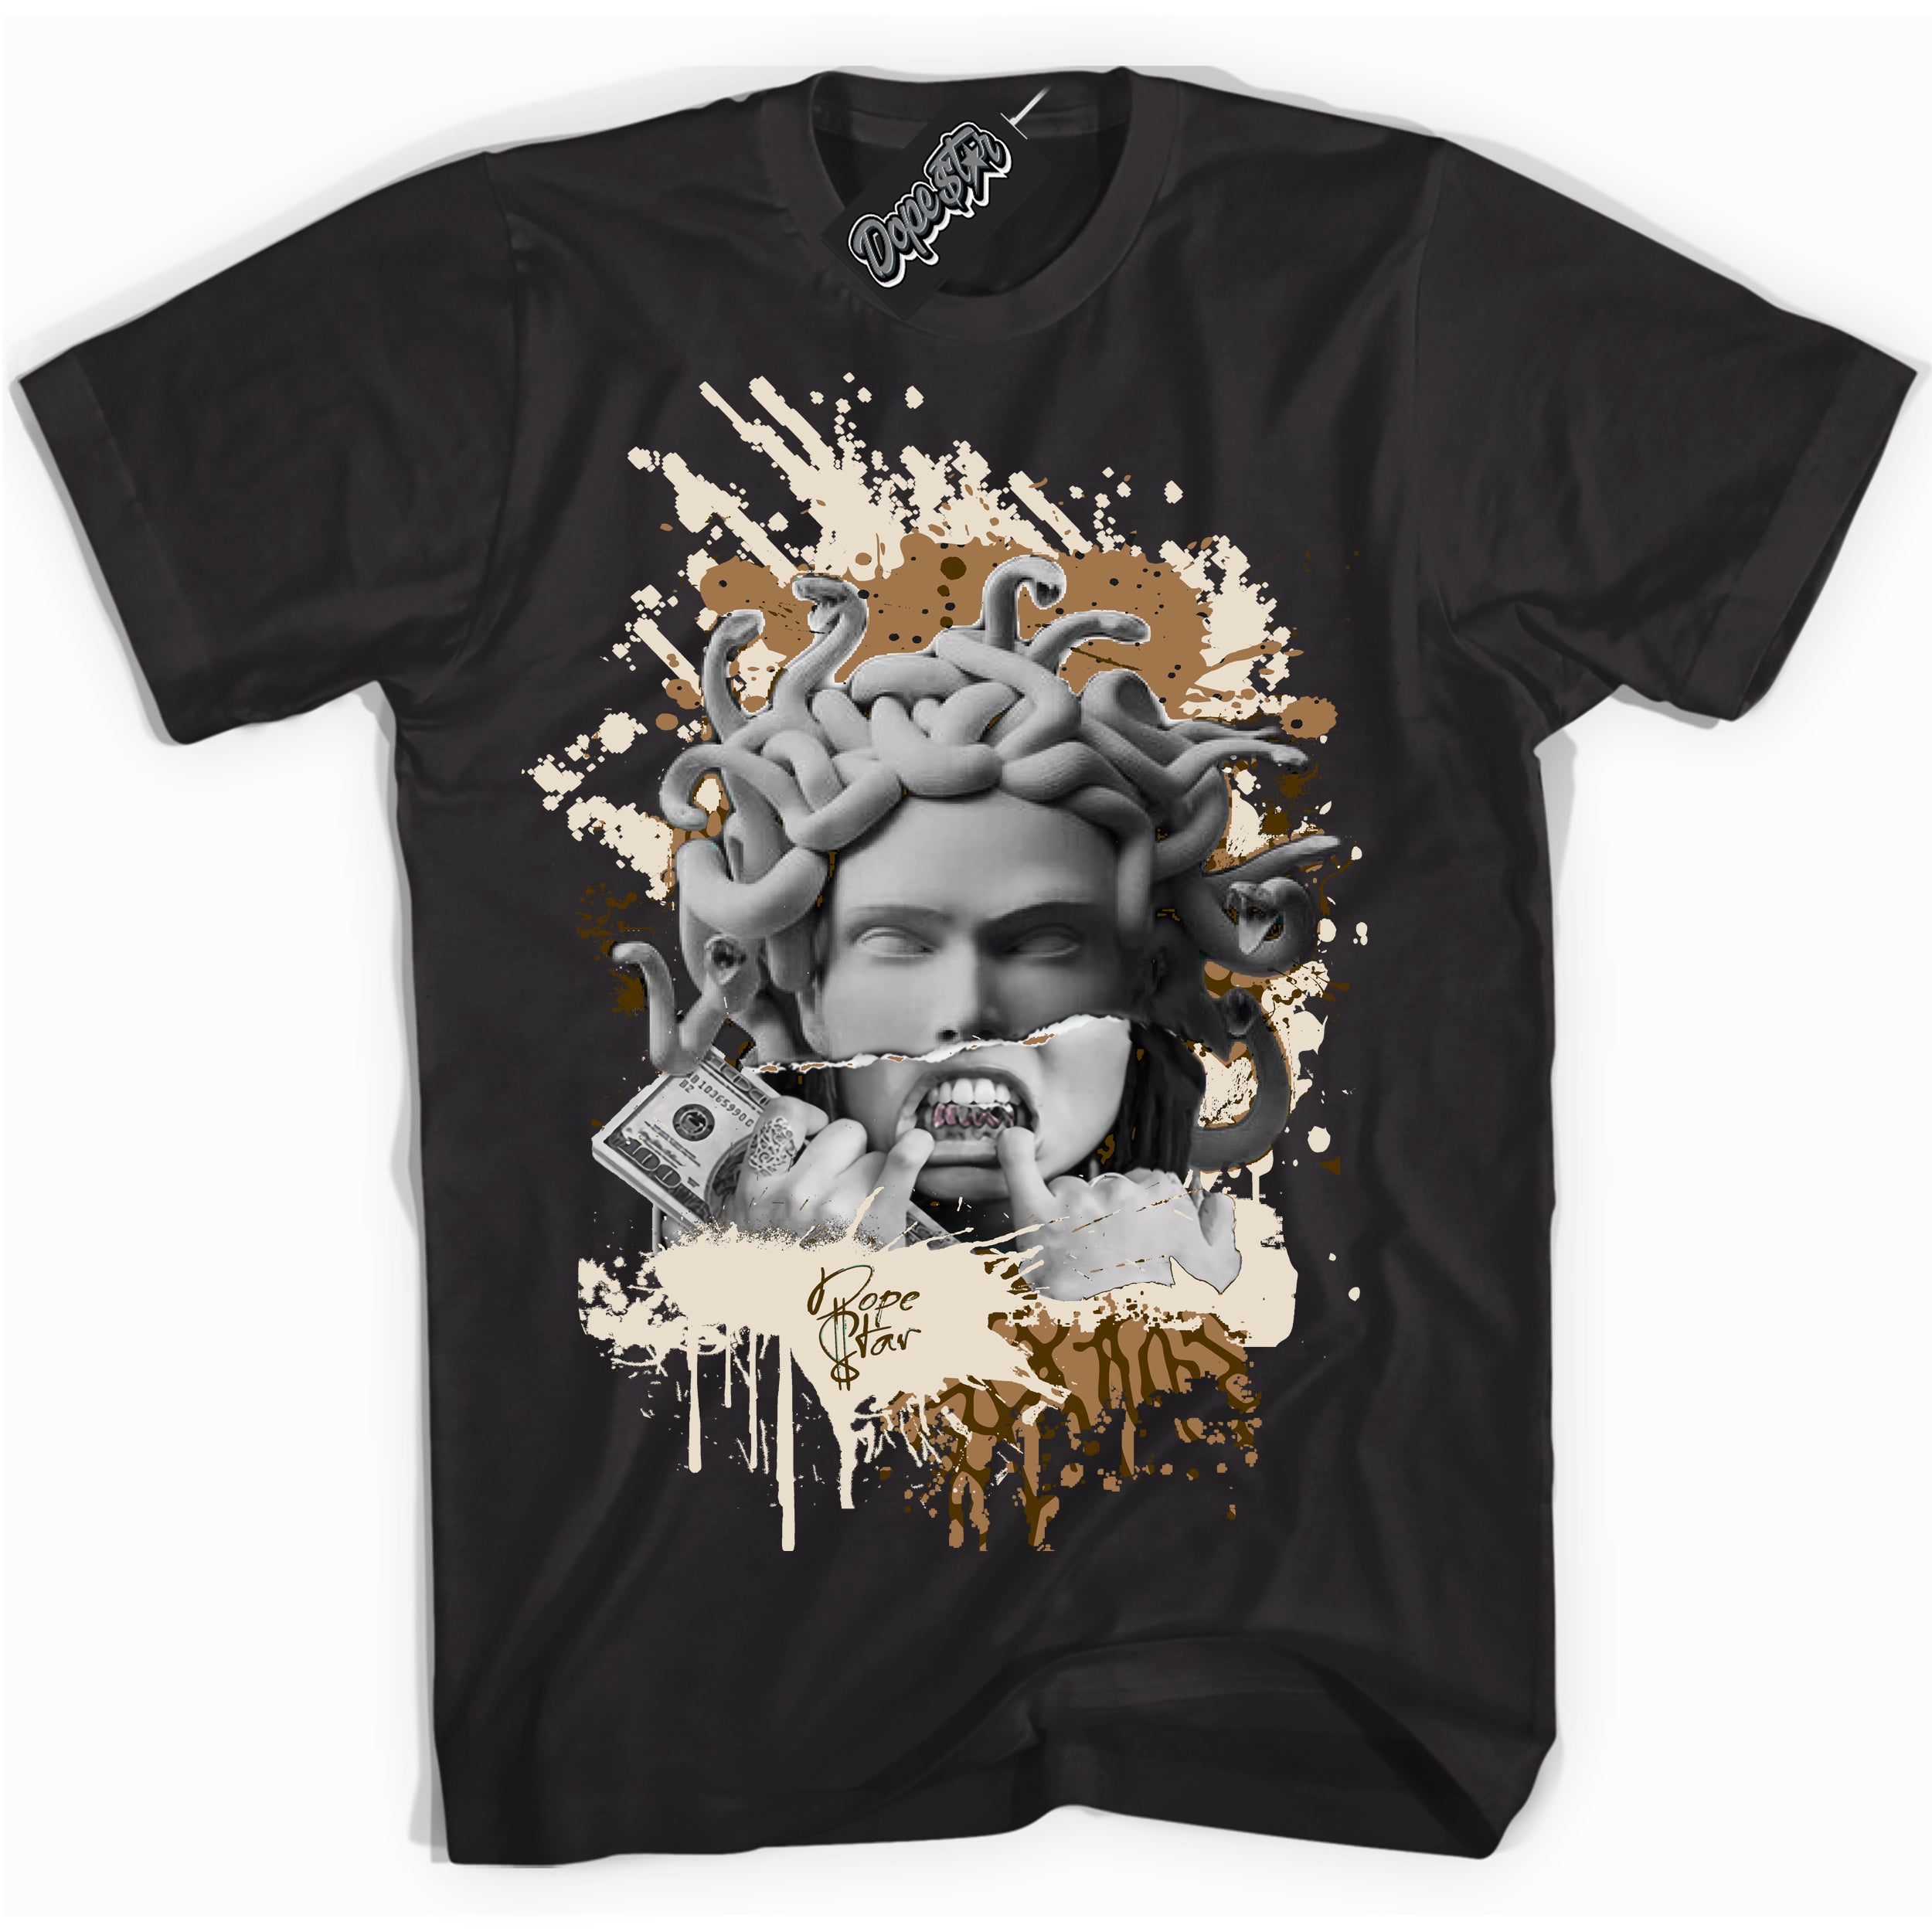 Cool Black graphic tee with “ Medusa ” design, that perfectly matches Palomino 3s sneakers 